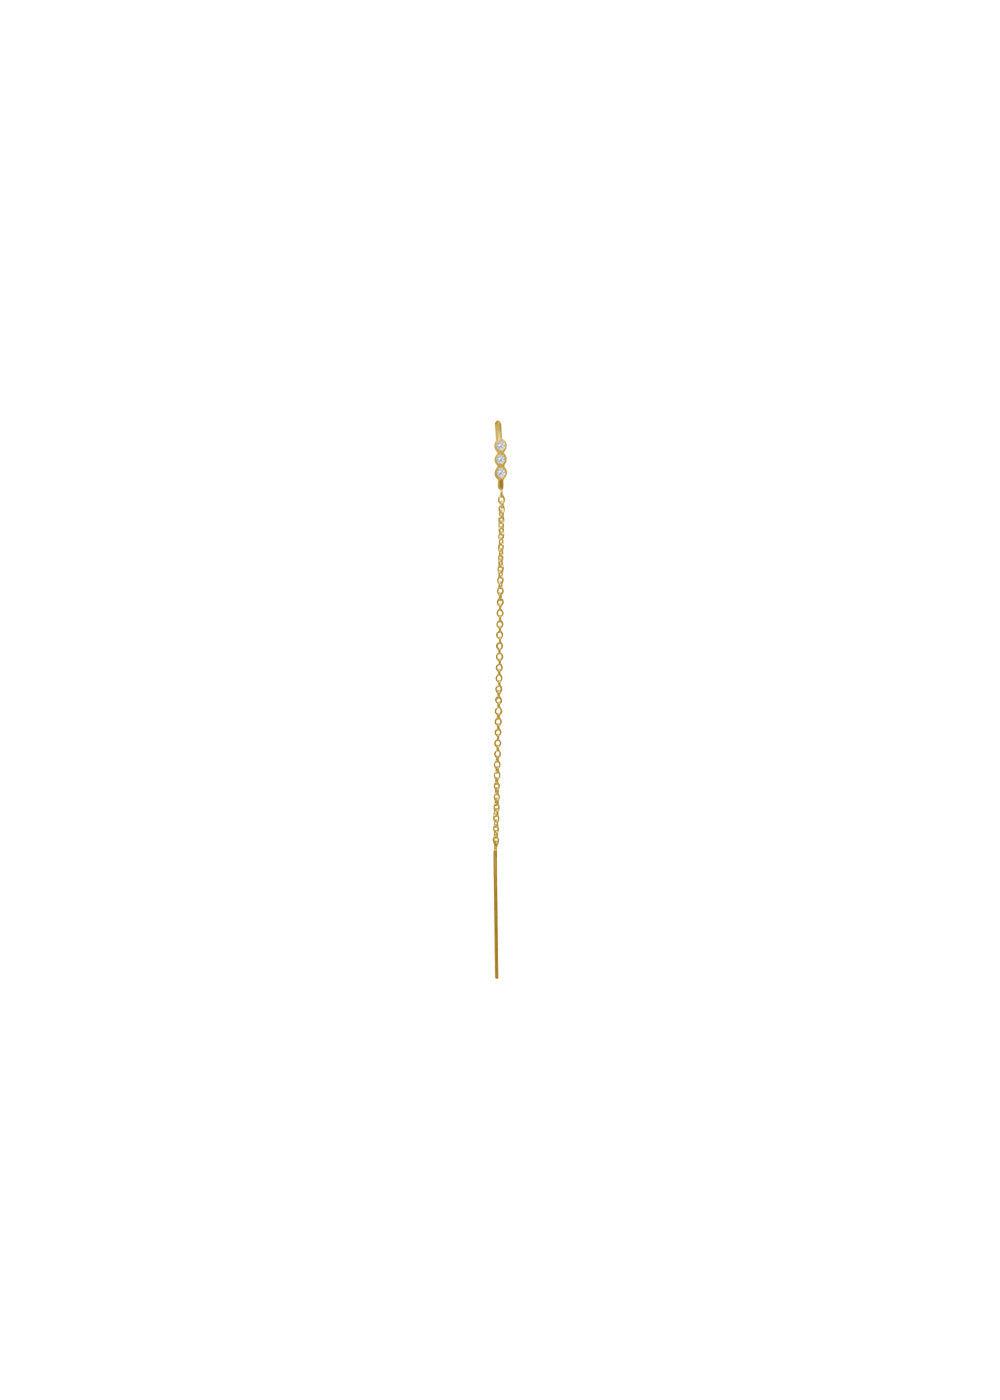 Stine A's Three Dots Double Chain Earring Piece - Gold. Køb øreringe her.